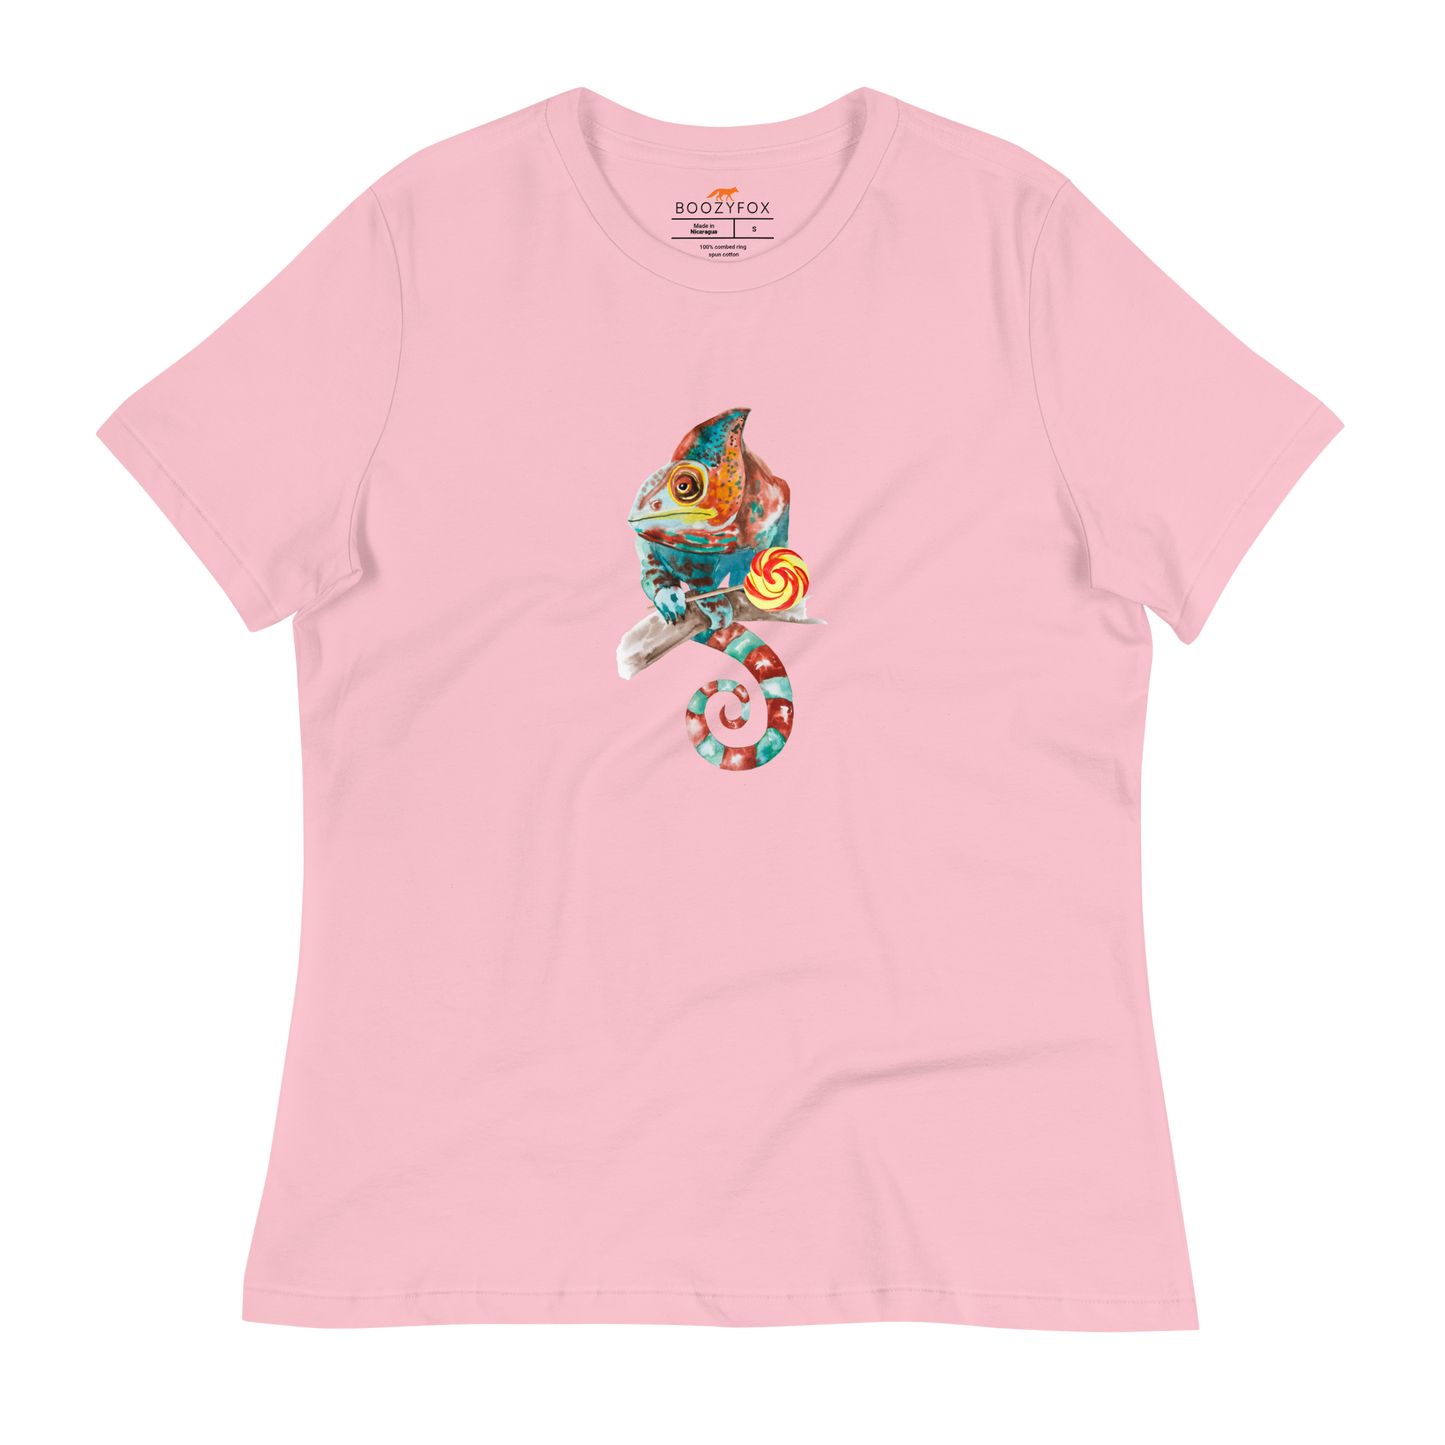 Women's relaxed pink Chameleon t-shirt featuring a colorful Chameleon With A Lollipop graphic on the chest - Women's Graphic Chameleon Tees - Boozy Fox